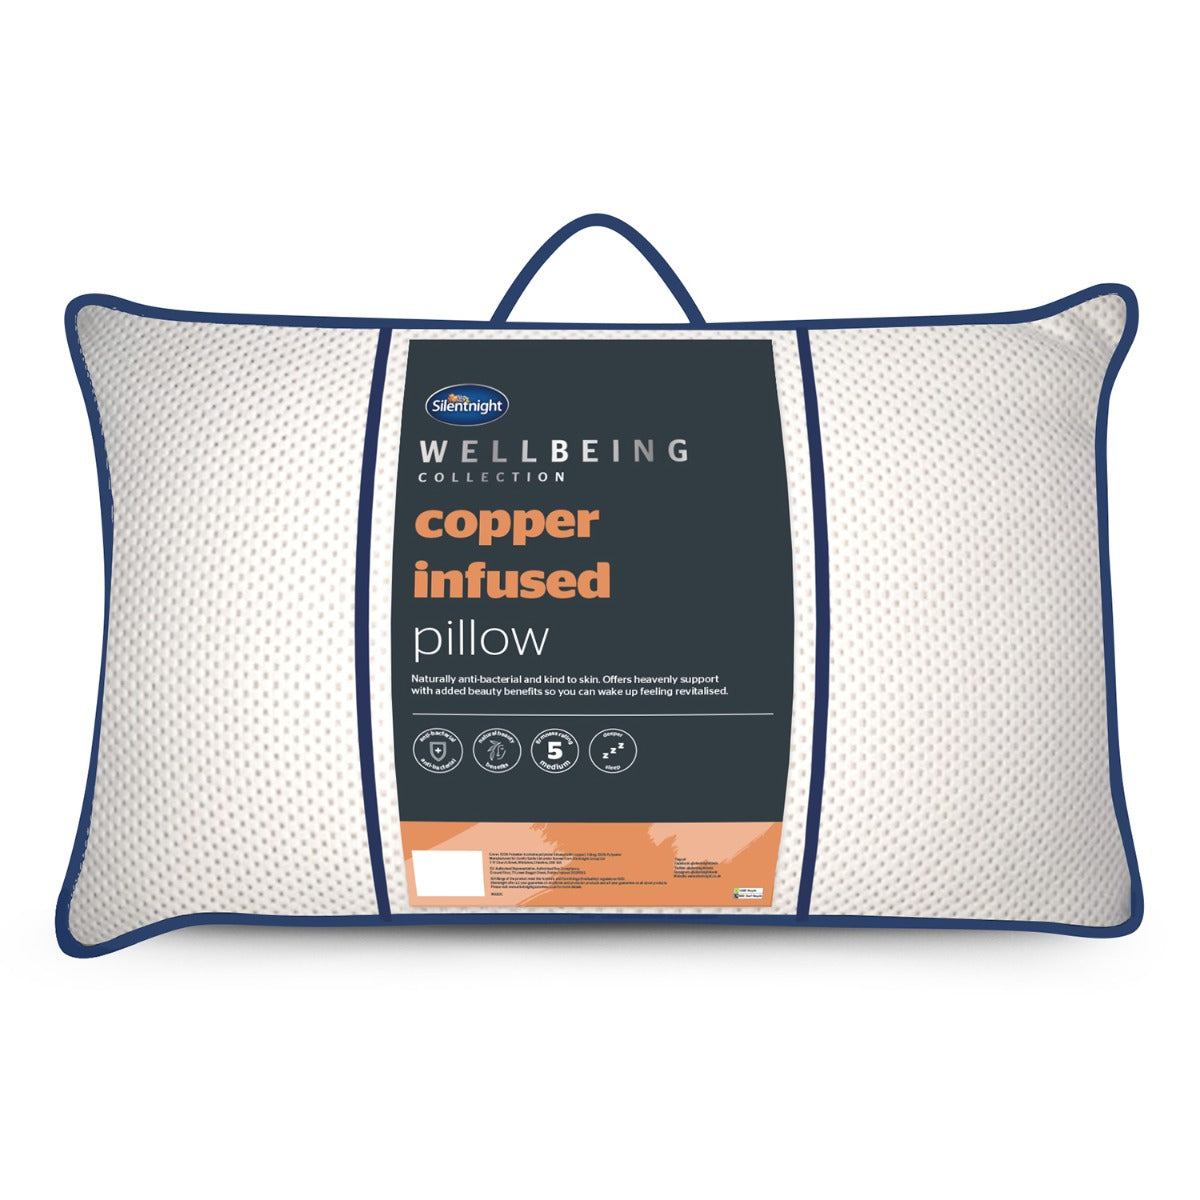 Silentnight Wellbeing Copper Infused Pillow - Medium Support